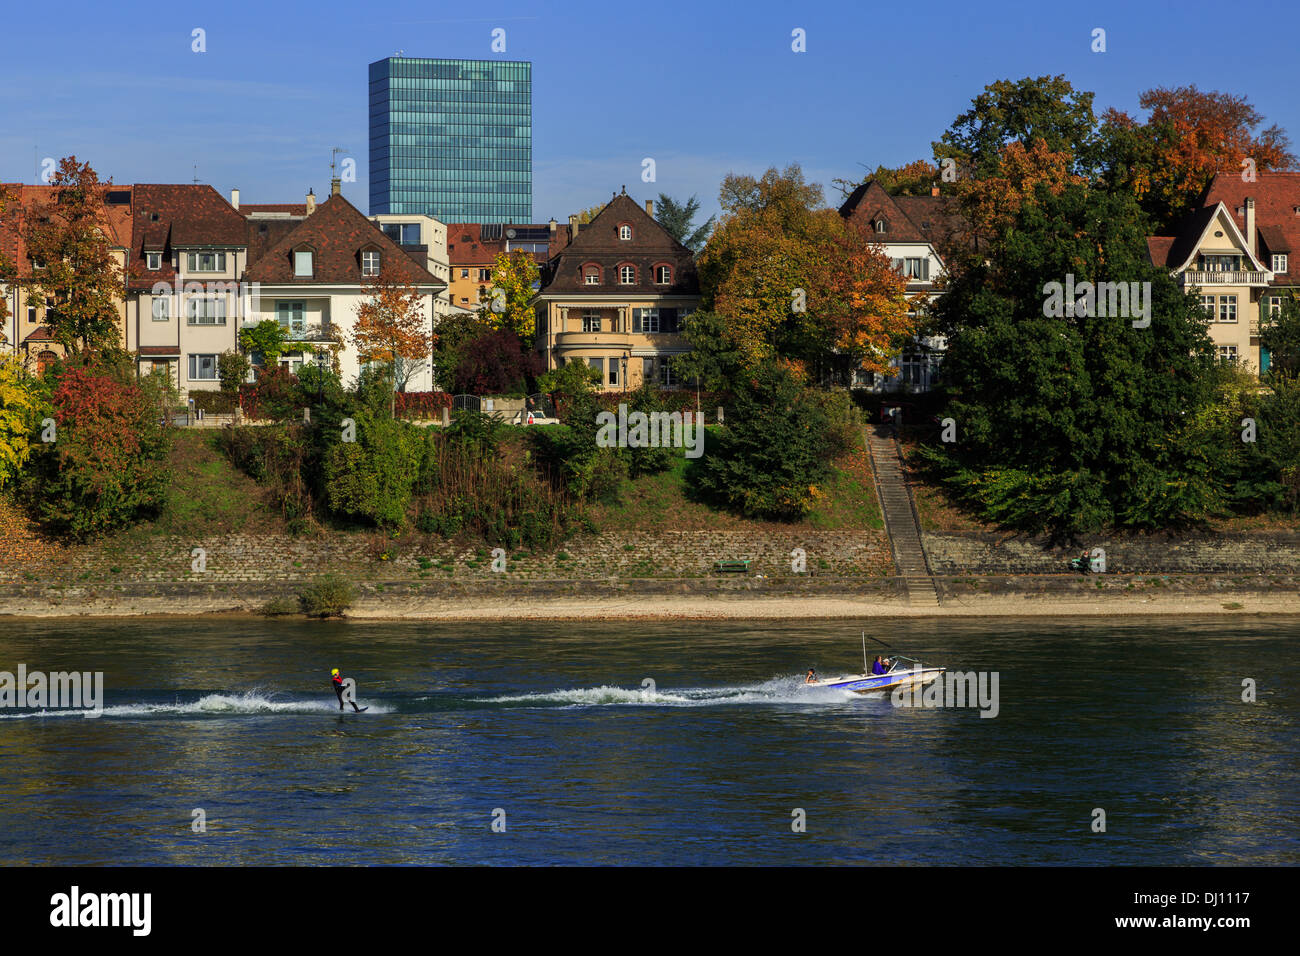 A photograph of a person water skiing on the Rhine river in Switzerland. Taken at the start of autumn on a sunny day. Stock Photo